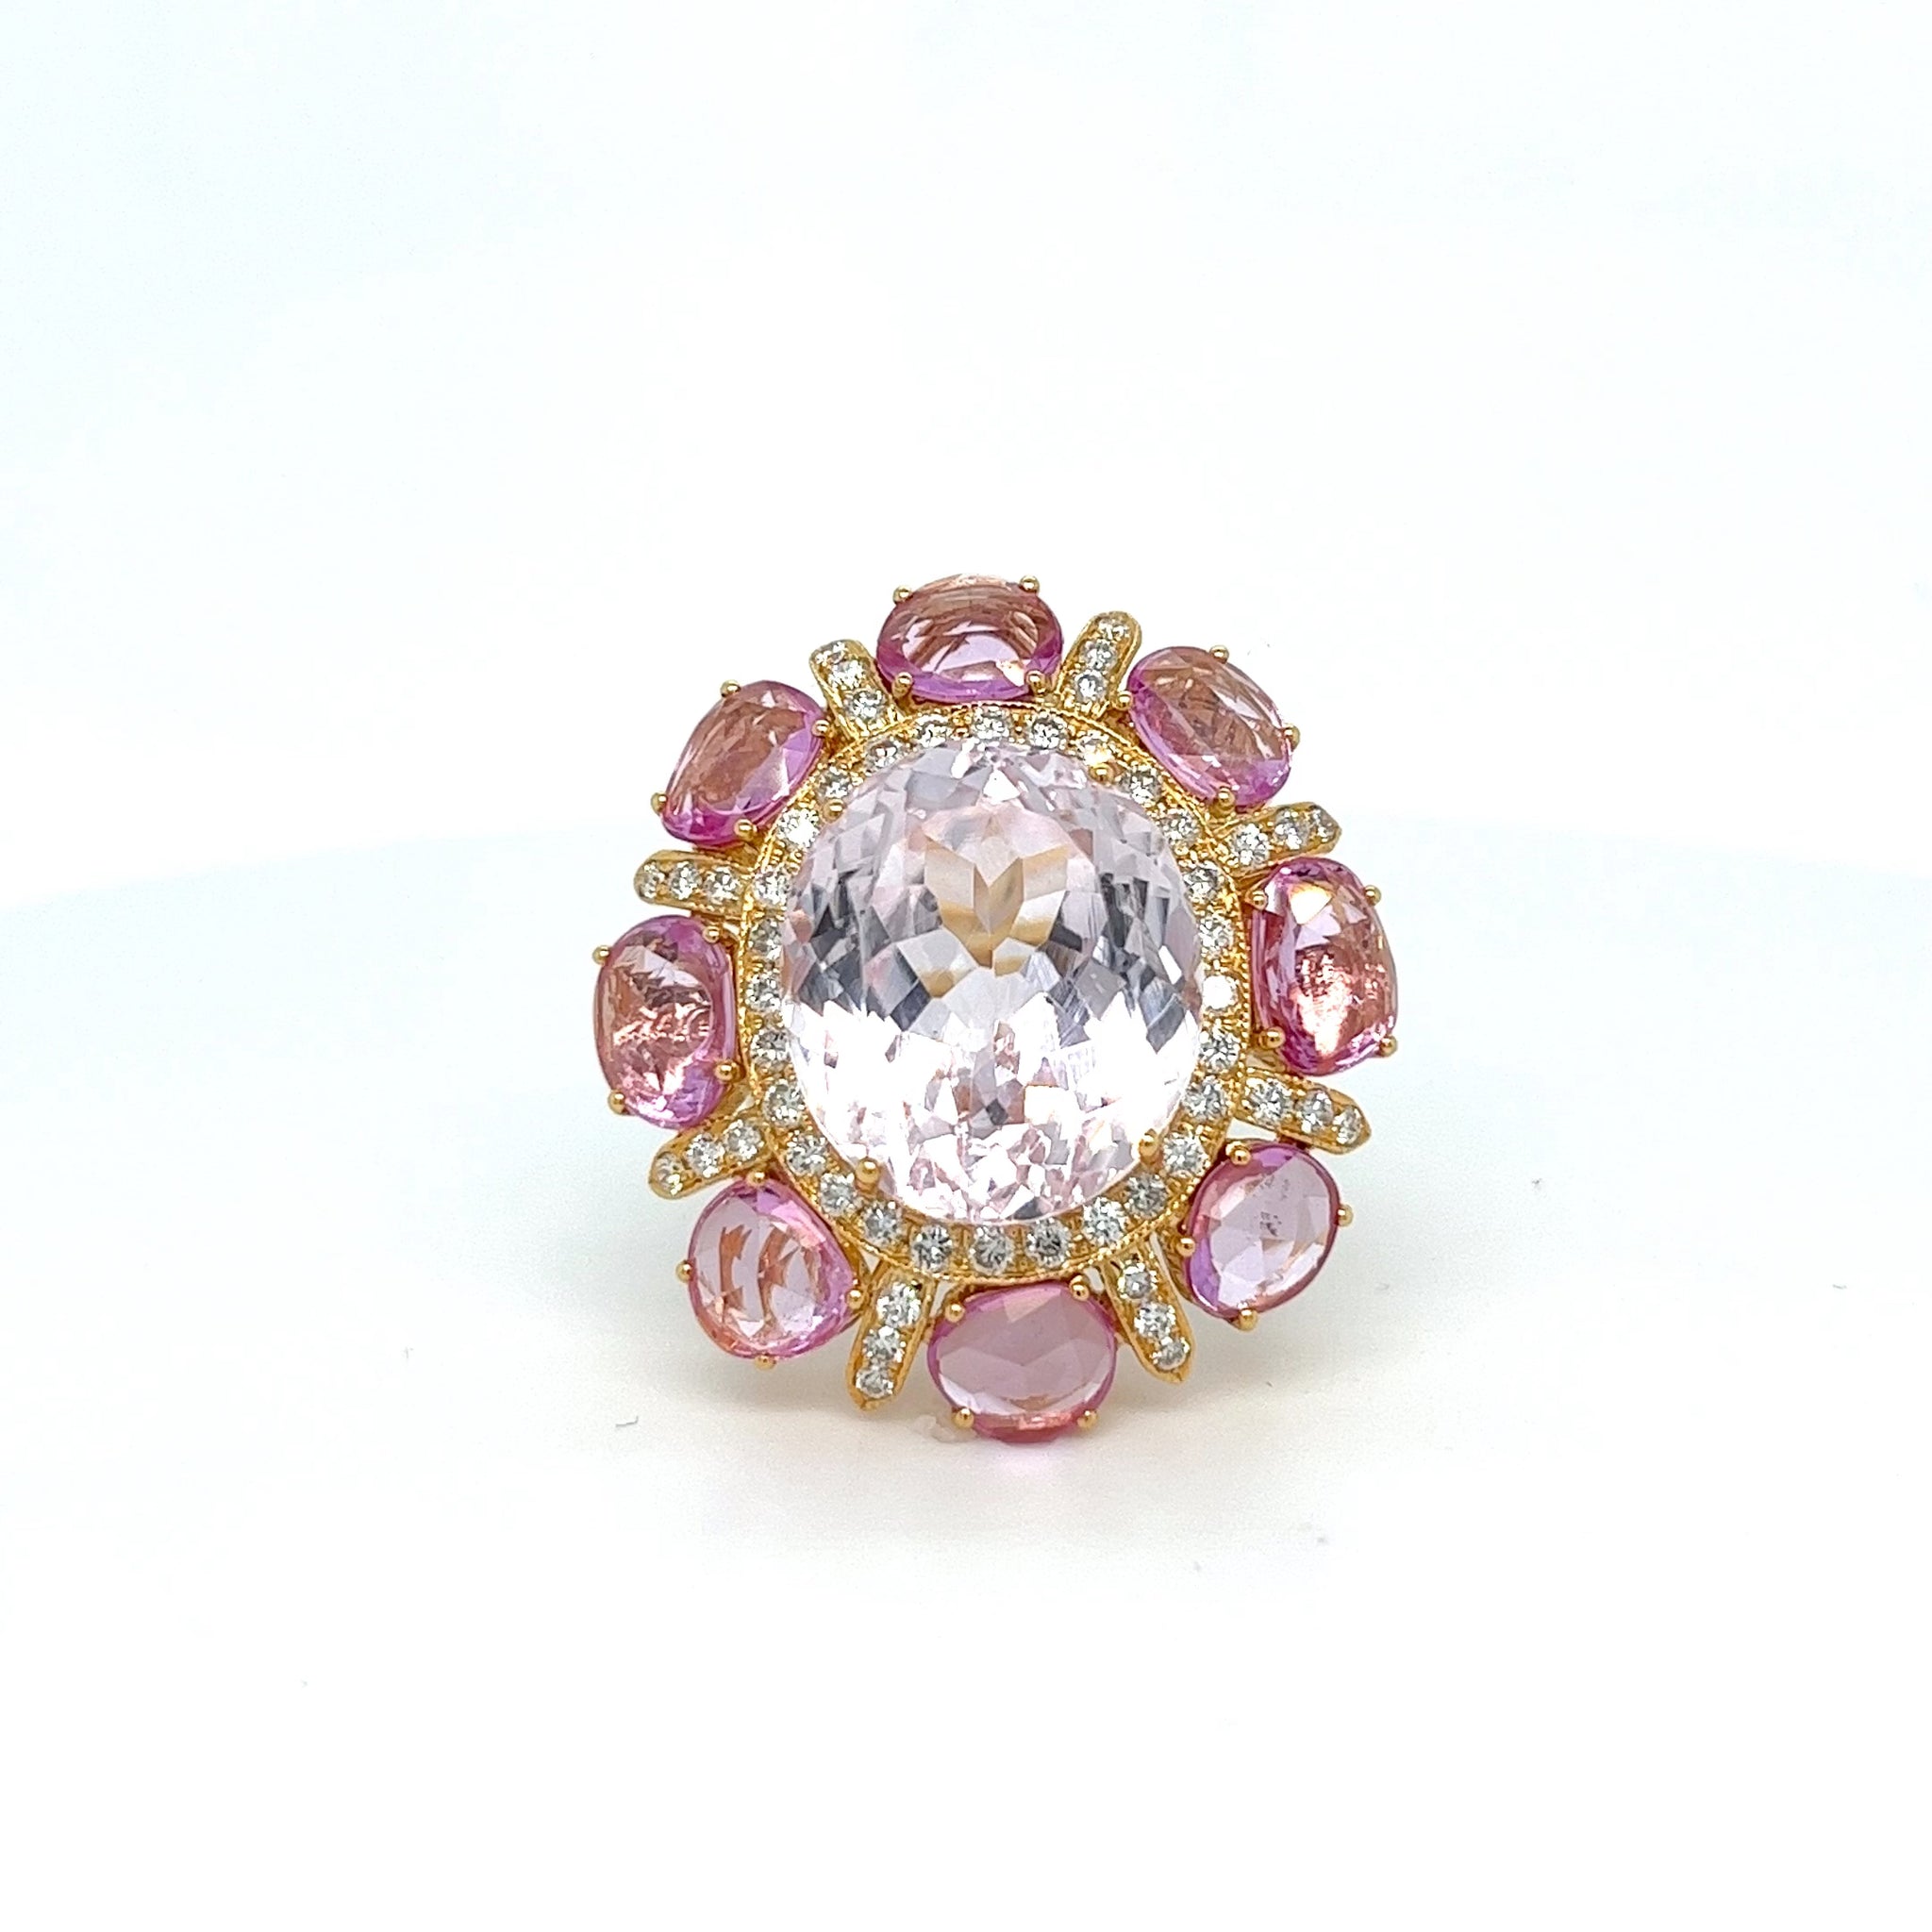 One-of-a-Kind 18kt Gold Center Kunzite with Pink Sapphires and Diamonds Cocktail Ring